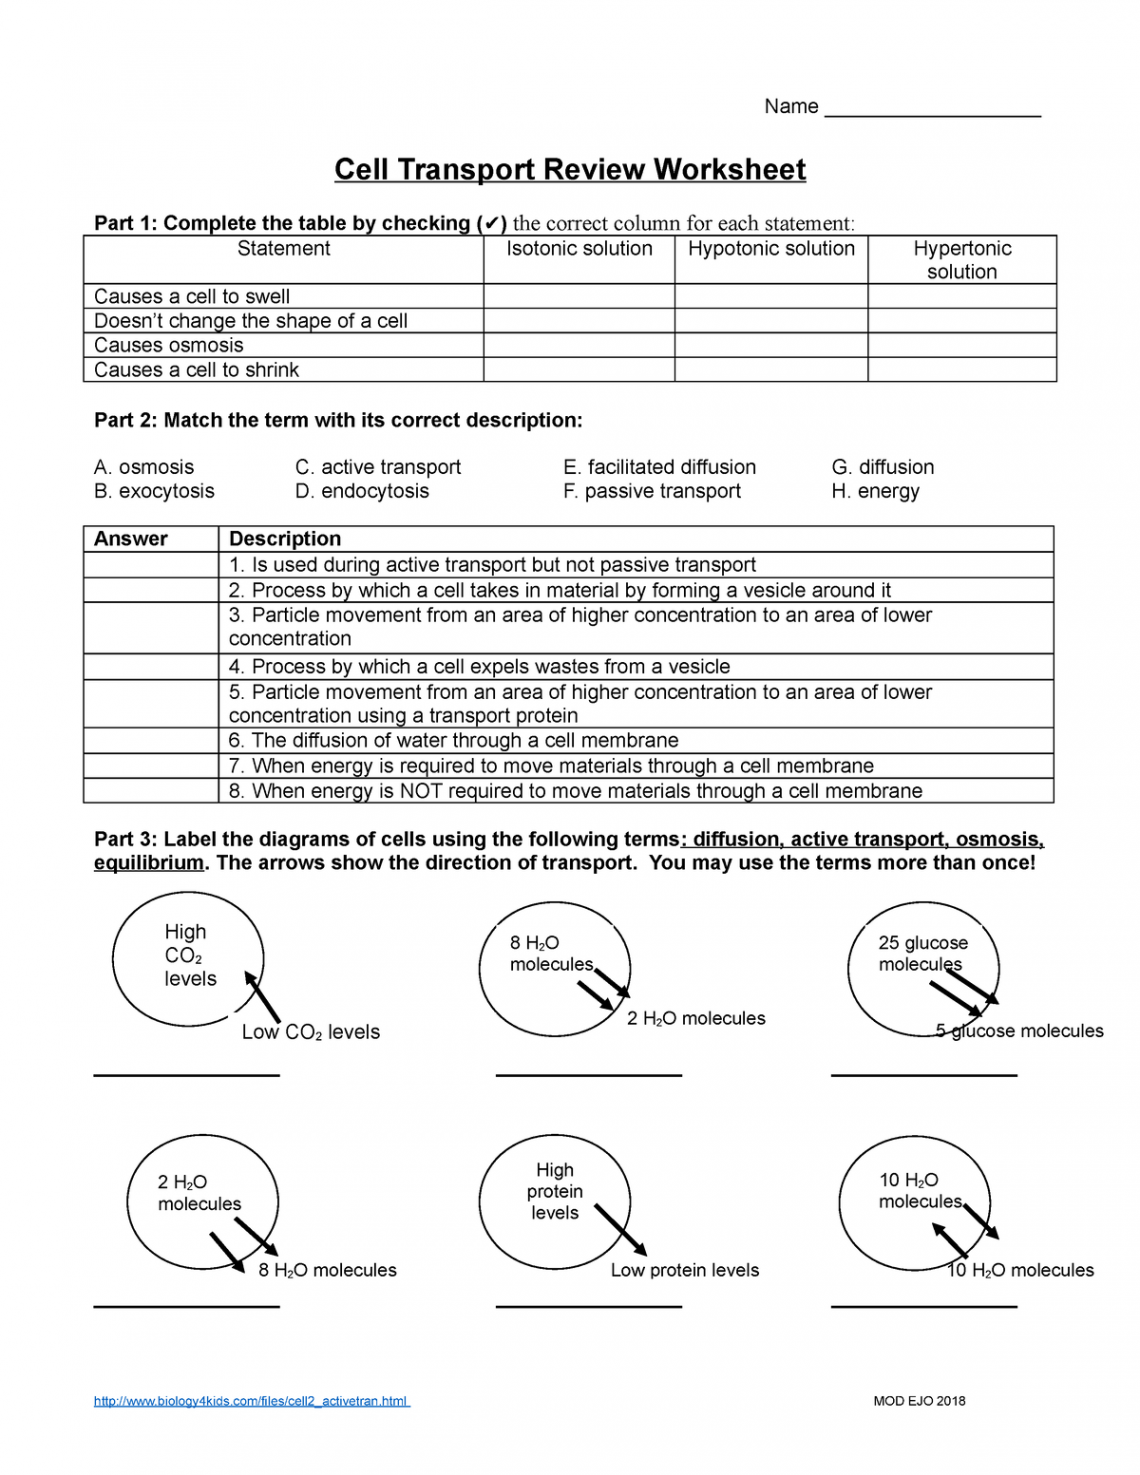 Handout - Cell Transport Review Worksheet - Name Cell Transport